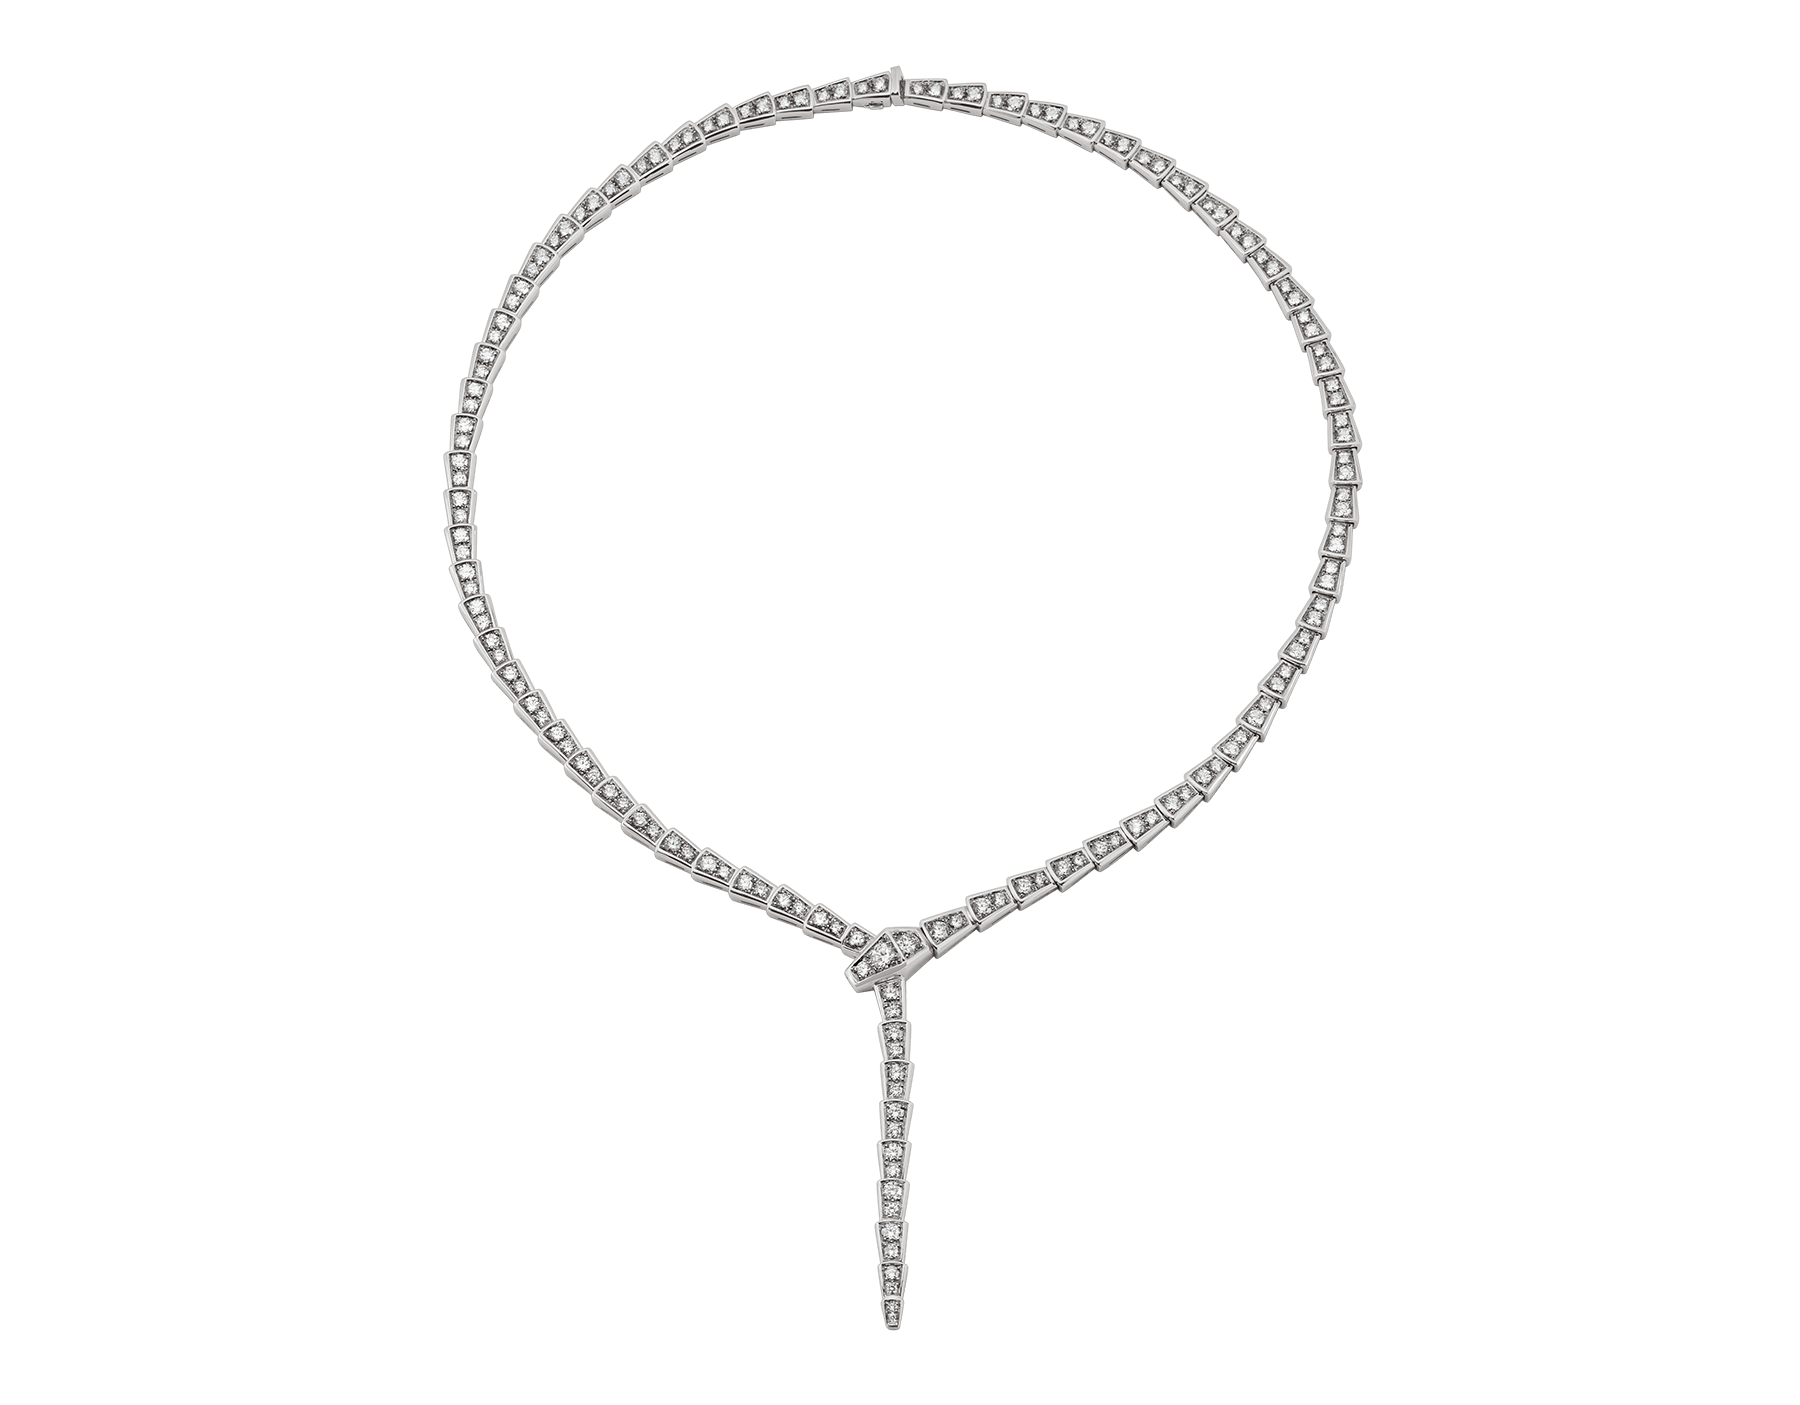 Serpenti Viper slim necklace in 18 kt white gold, set with full pavé diamonds. 351090 image 1